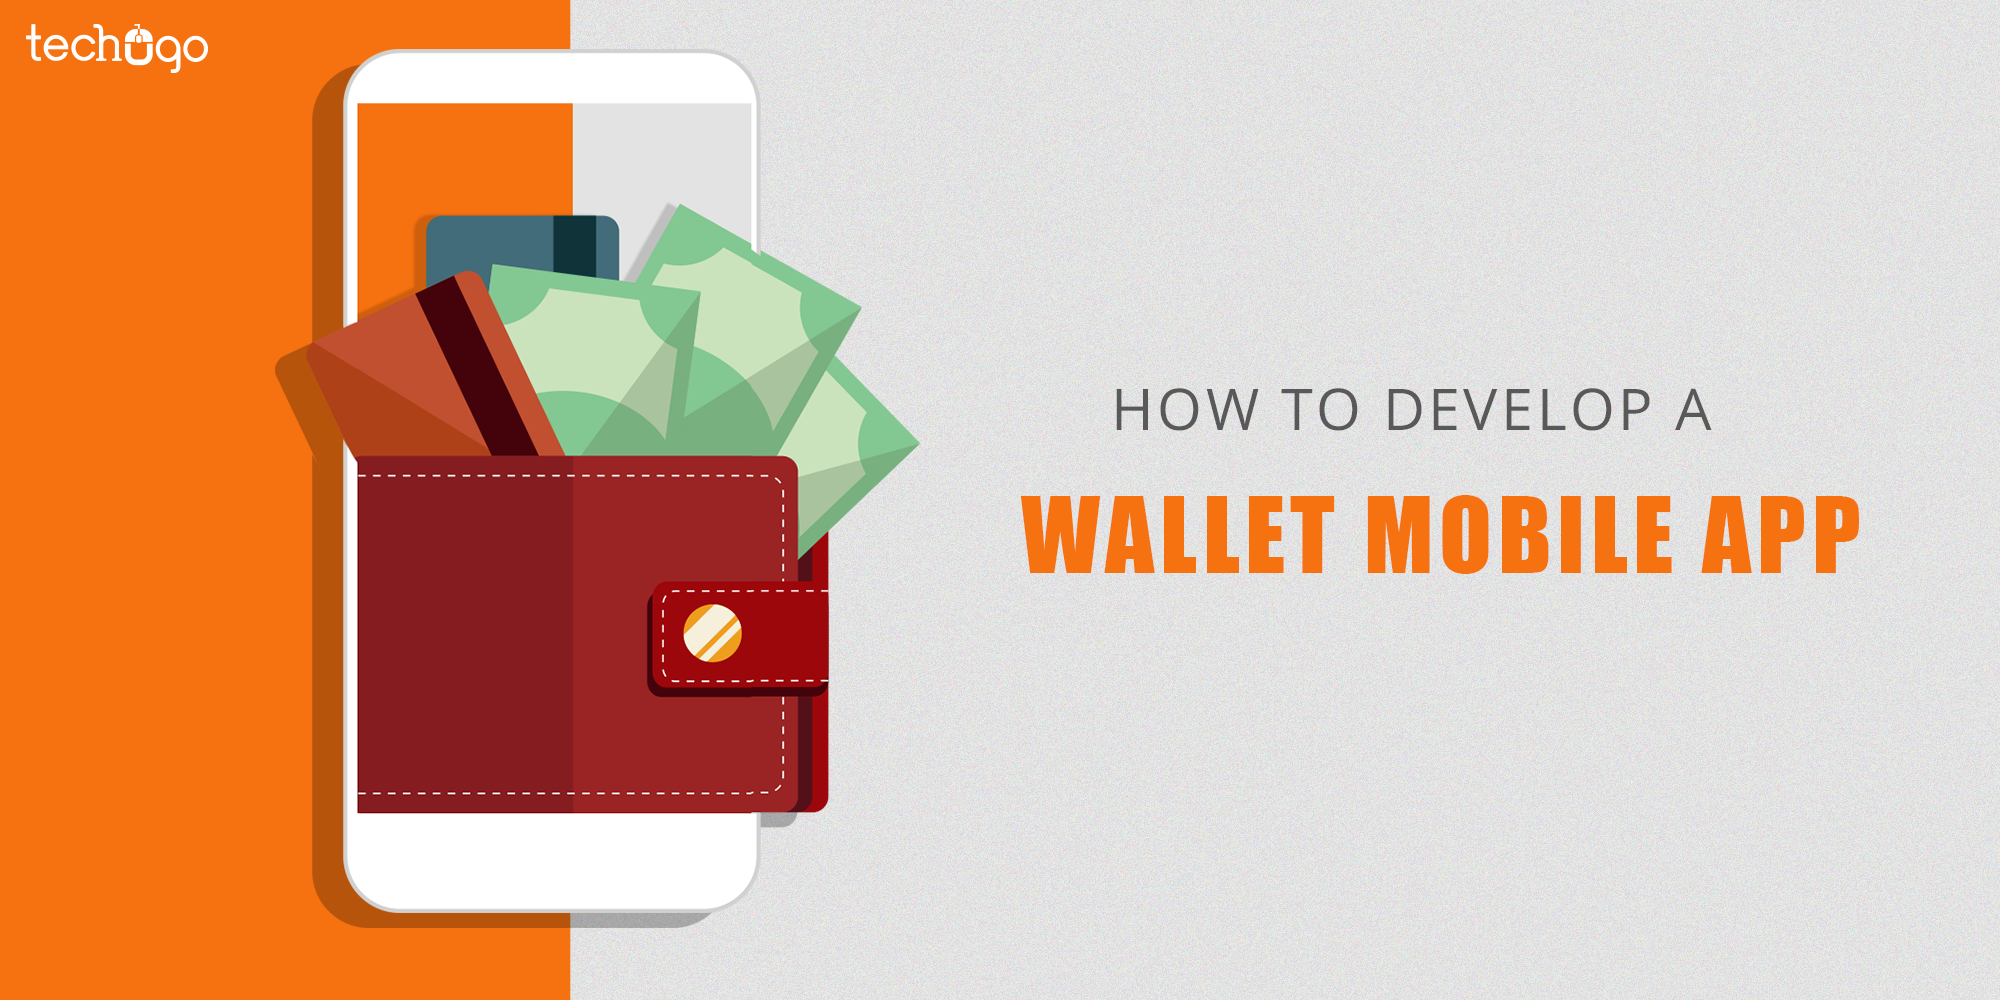 How To Develop A Wallet Mobile App